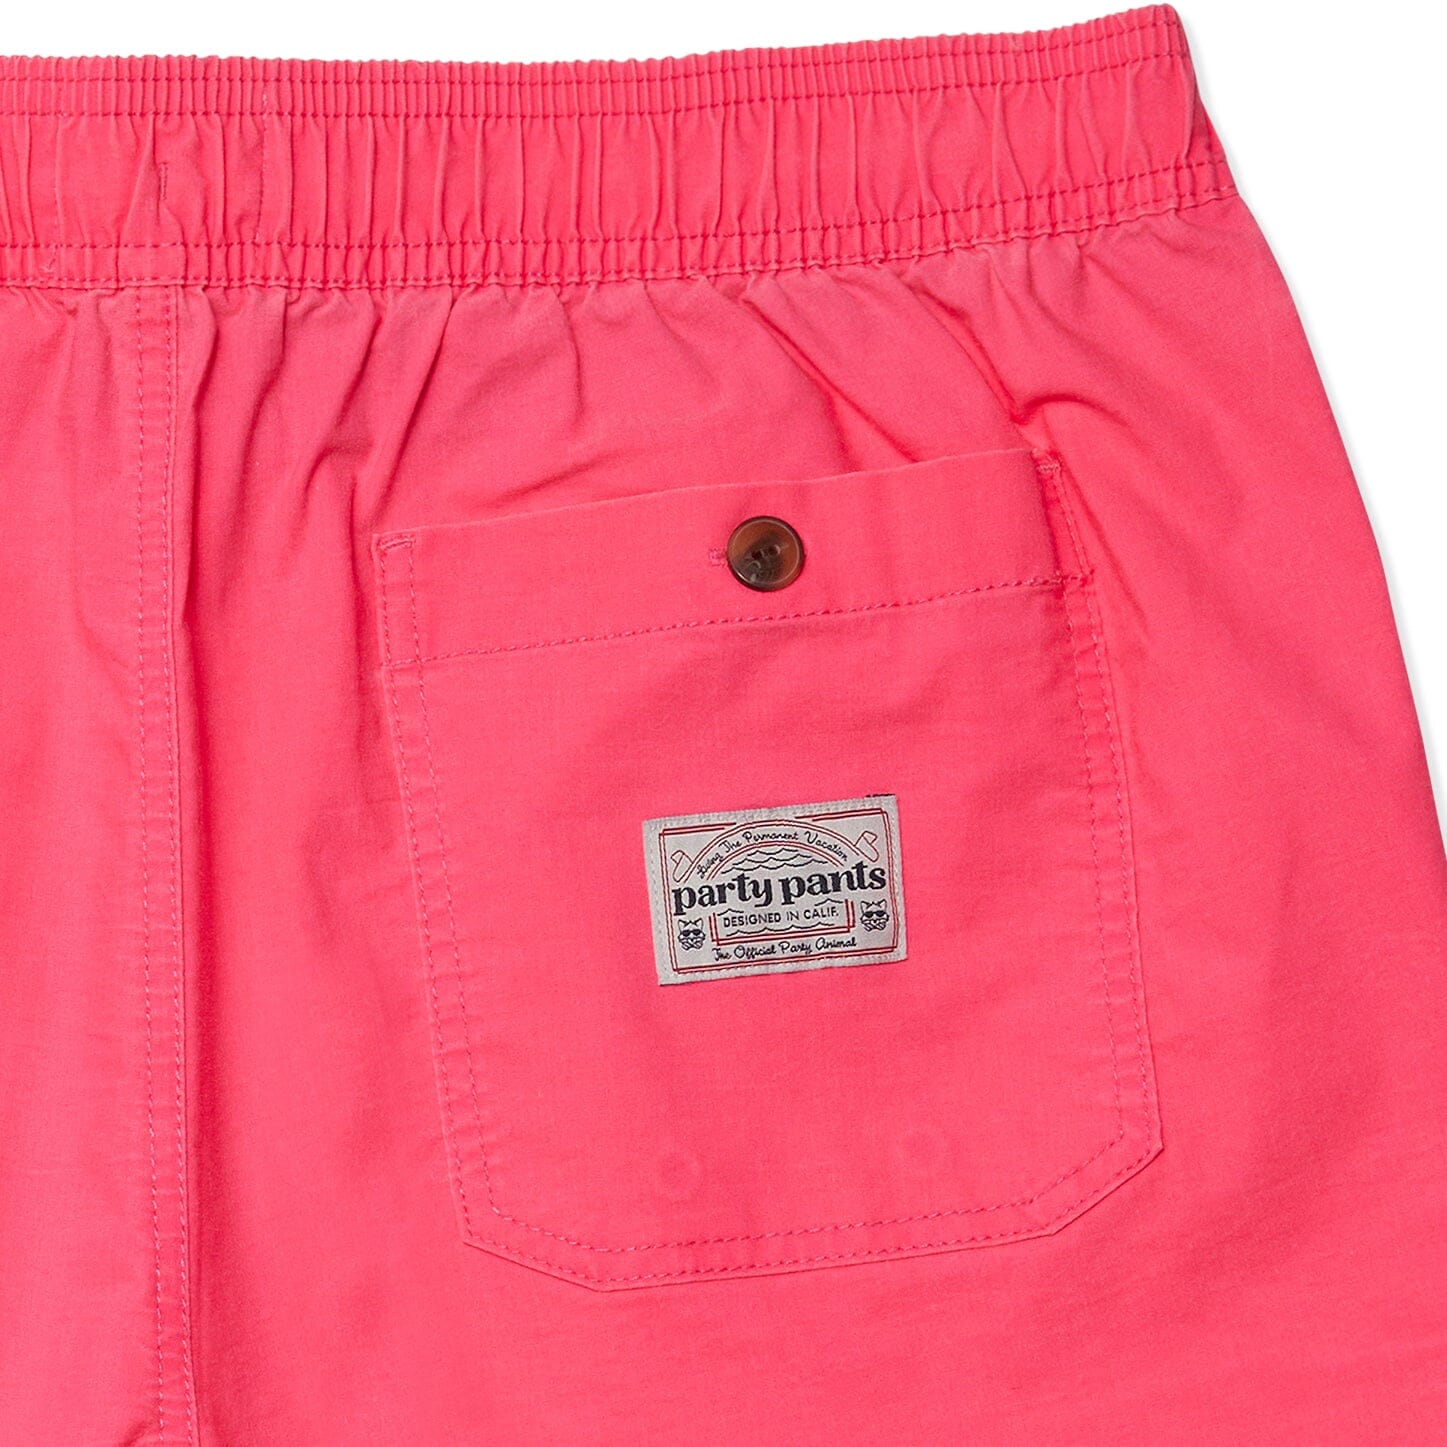 SOLID PARTY STARTER SHORT - PINK VINTAGE SOLID SHORTS PARTY PANTS 